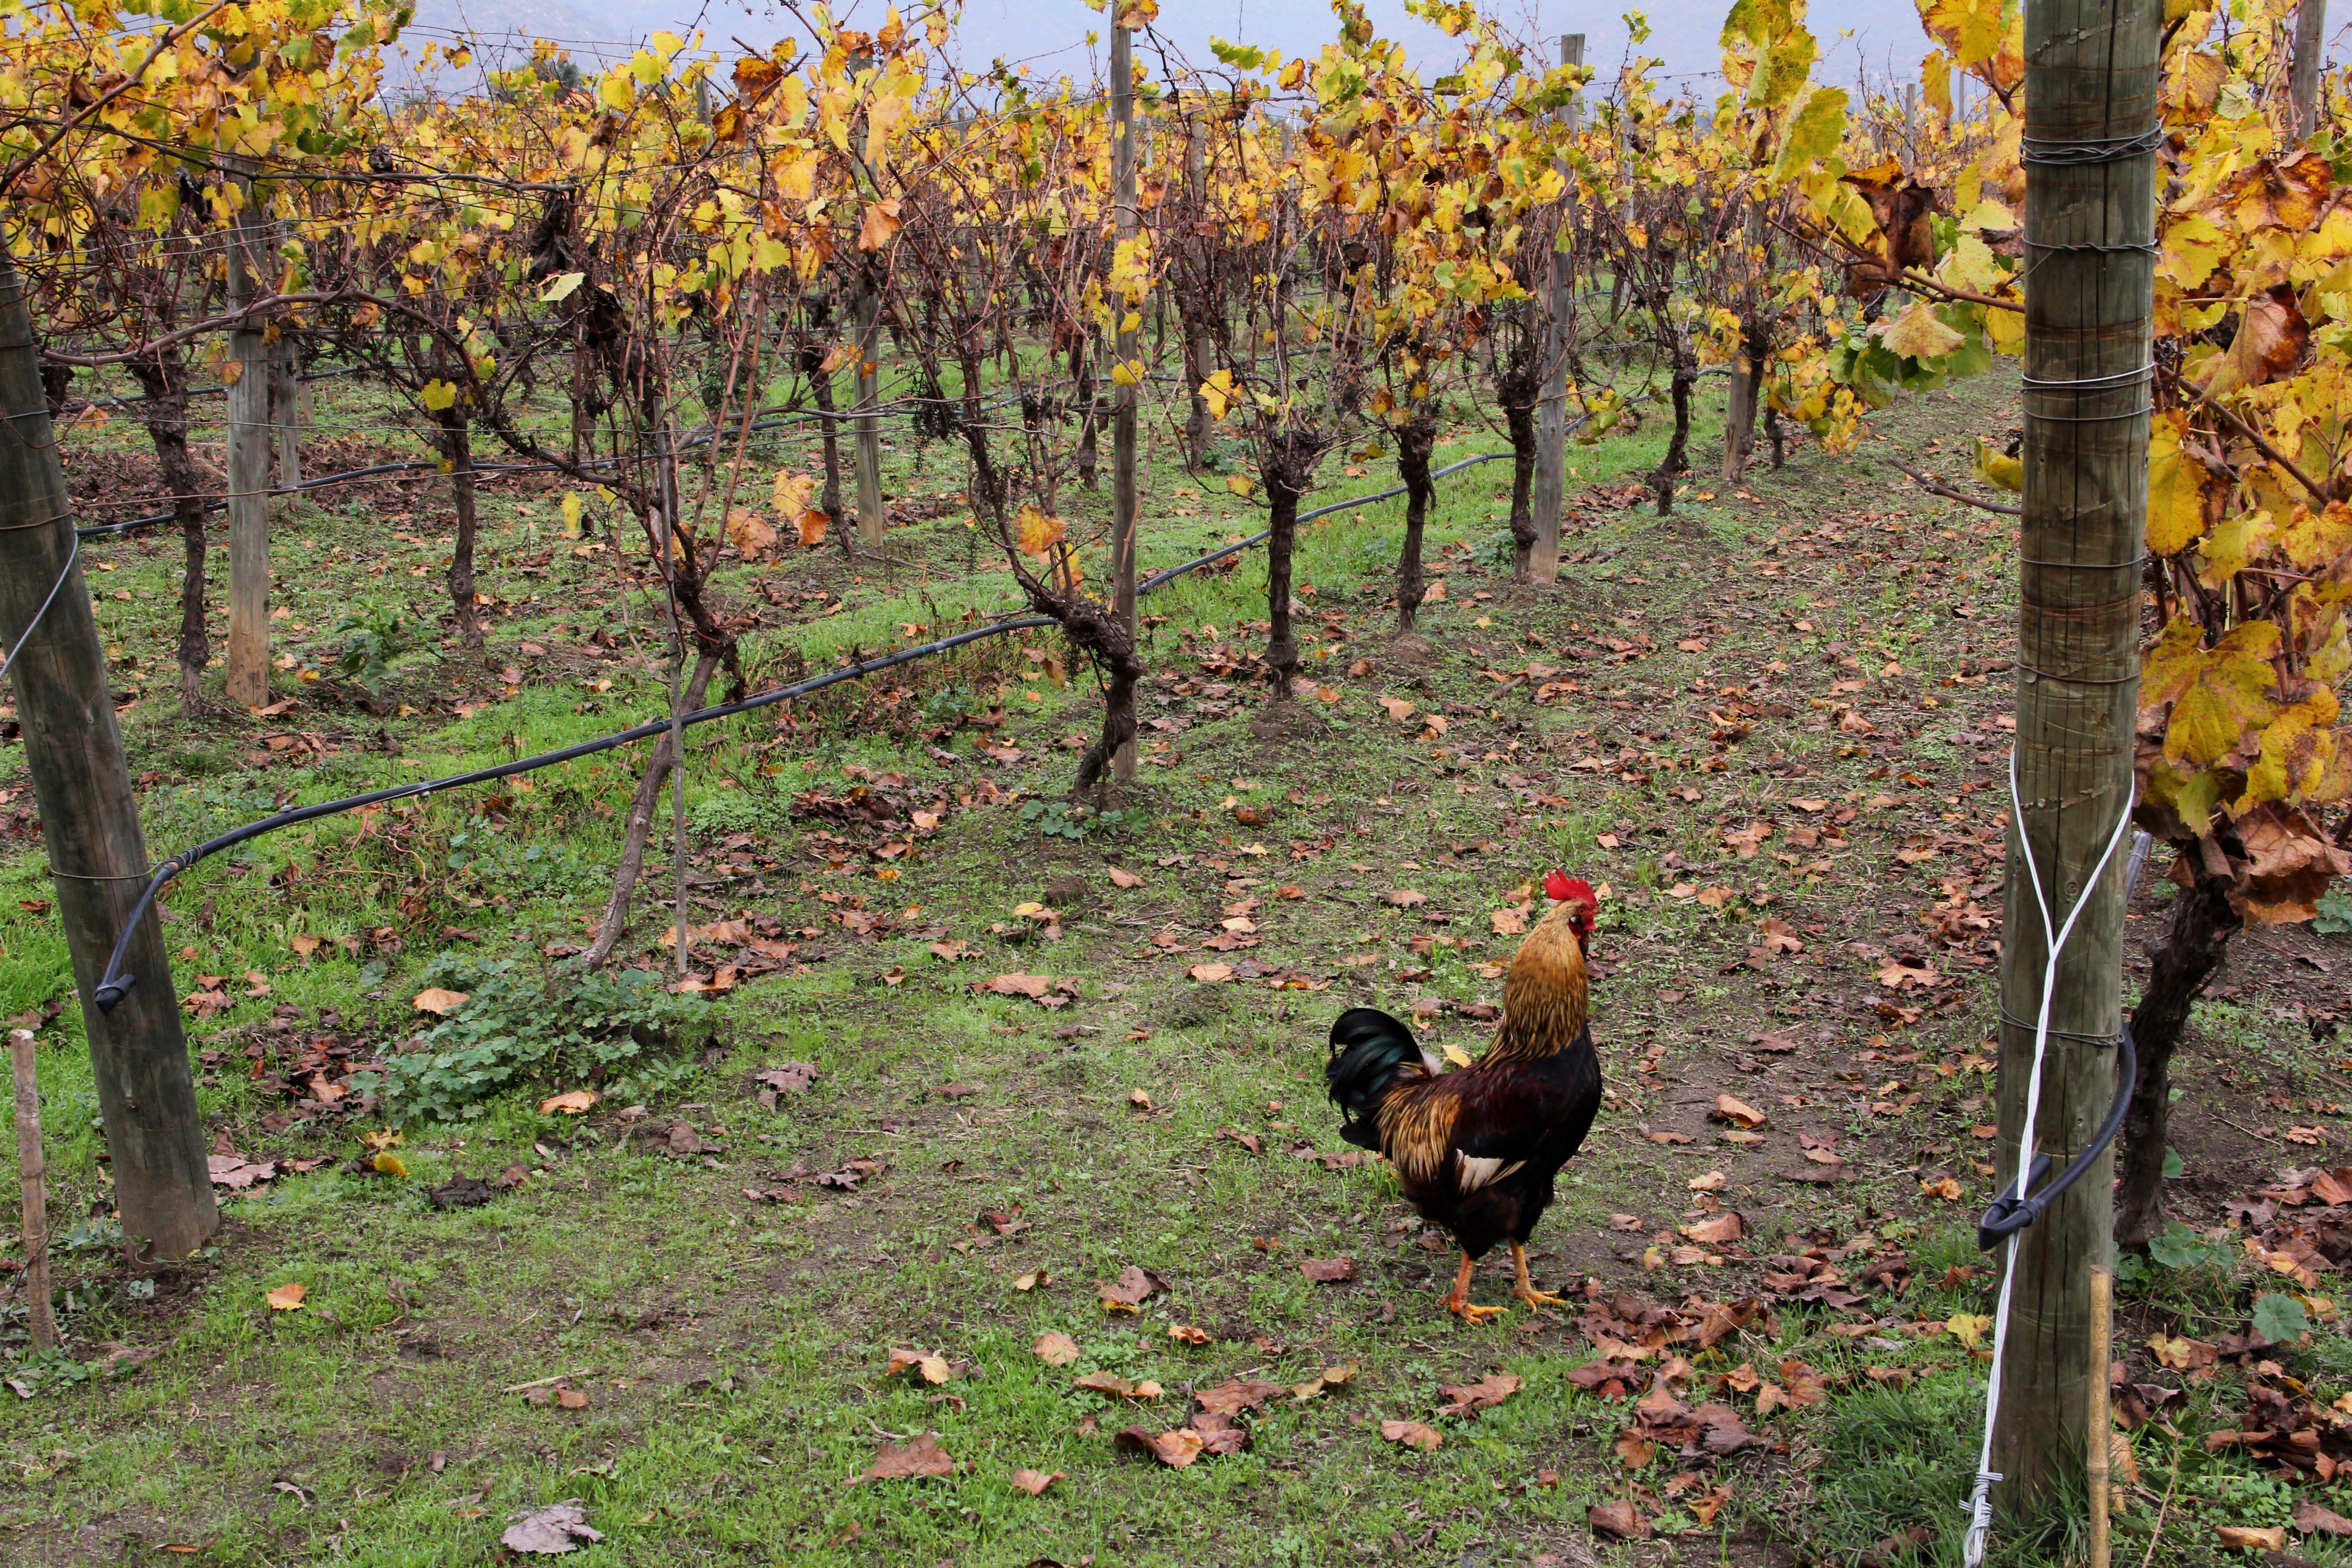 Emiliana Vineyards uses chickens to eat insects and fertilize the grape vines. Image by Taylor Lord. Chile, 2017.